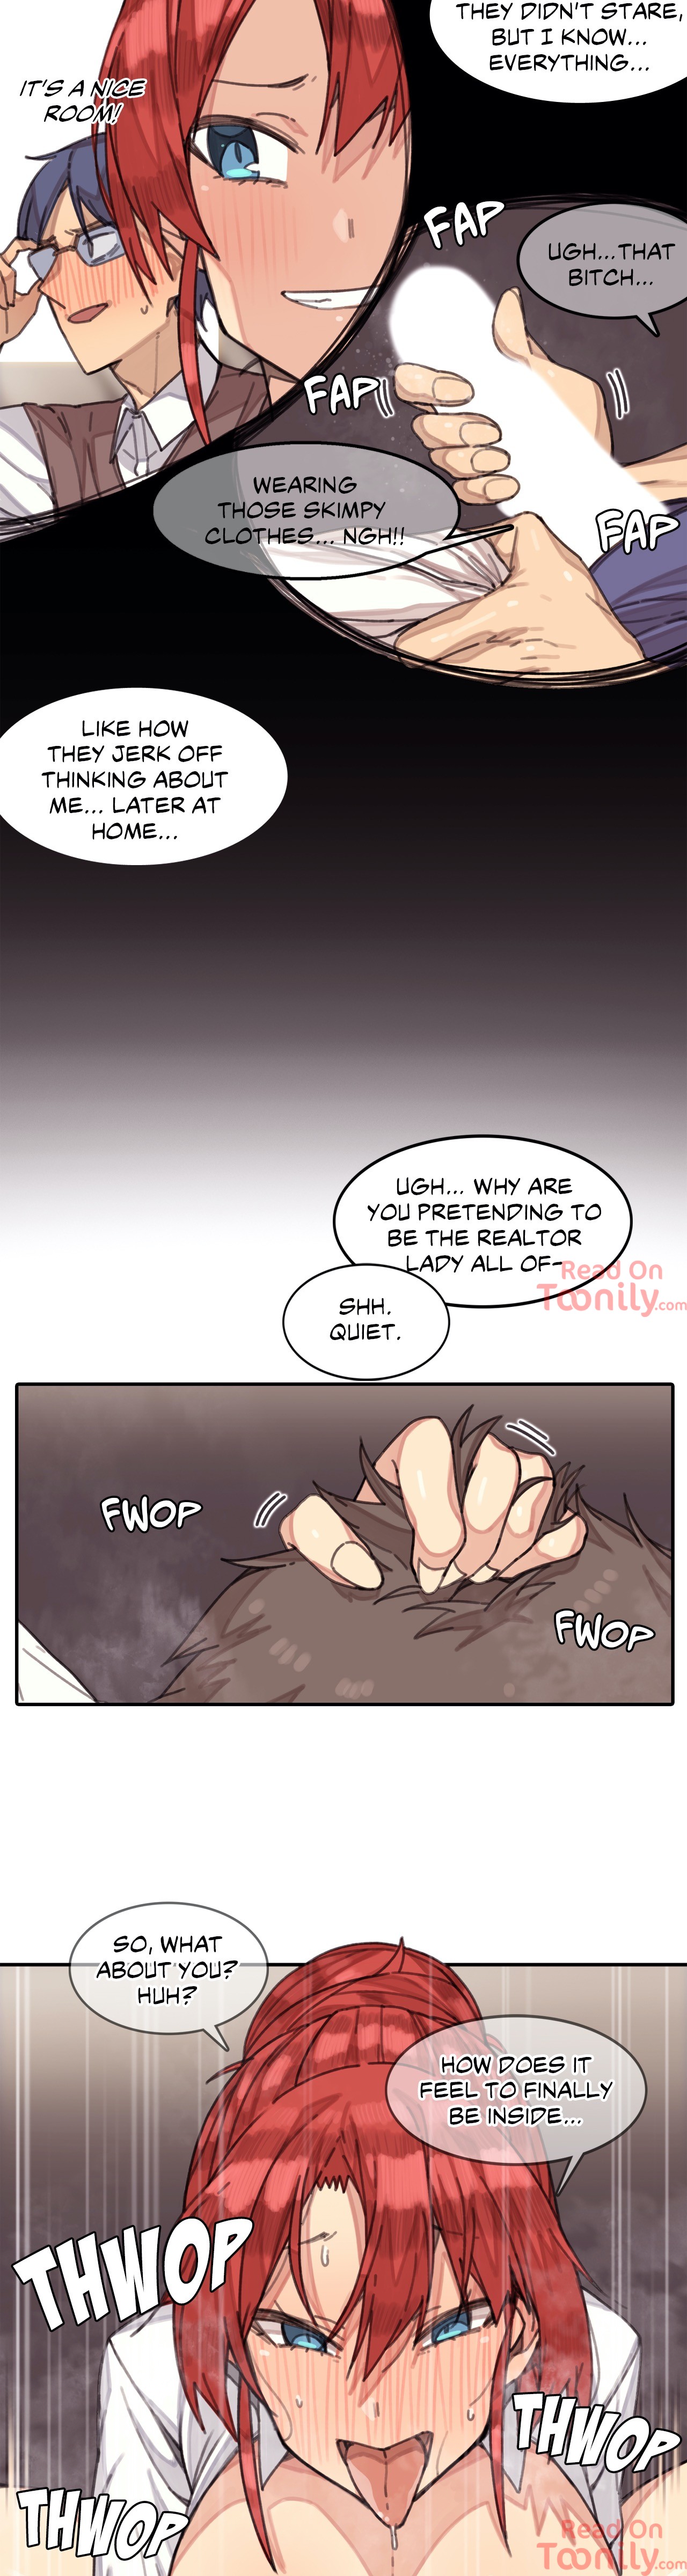 The Girl That Lingers in the Wall - Chapter 5 Page 7